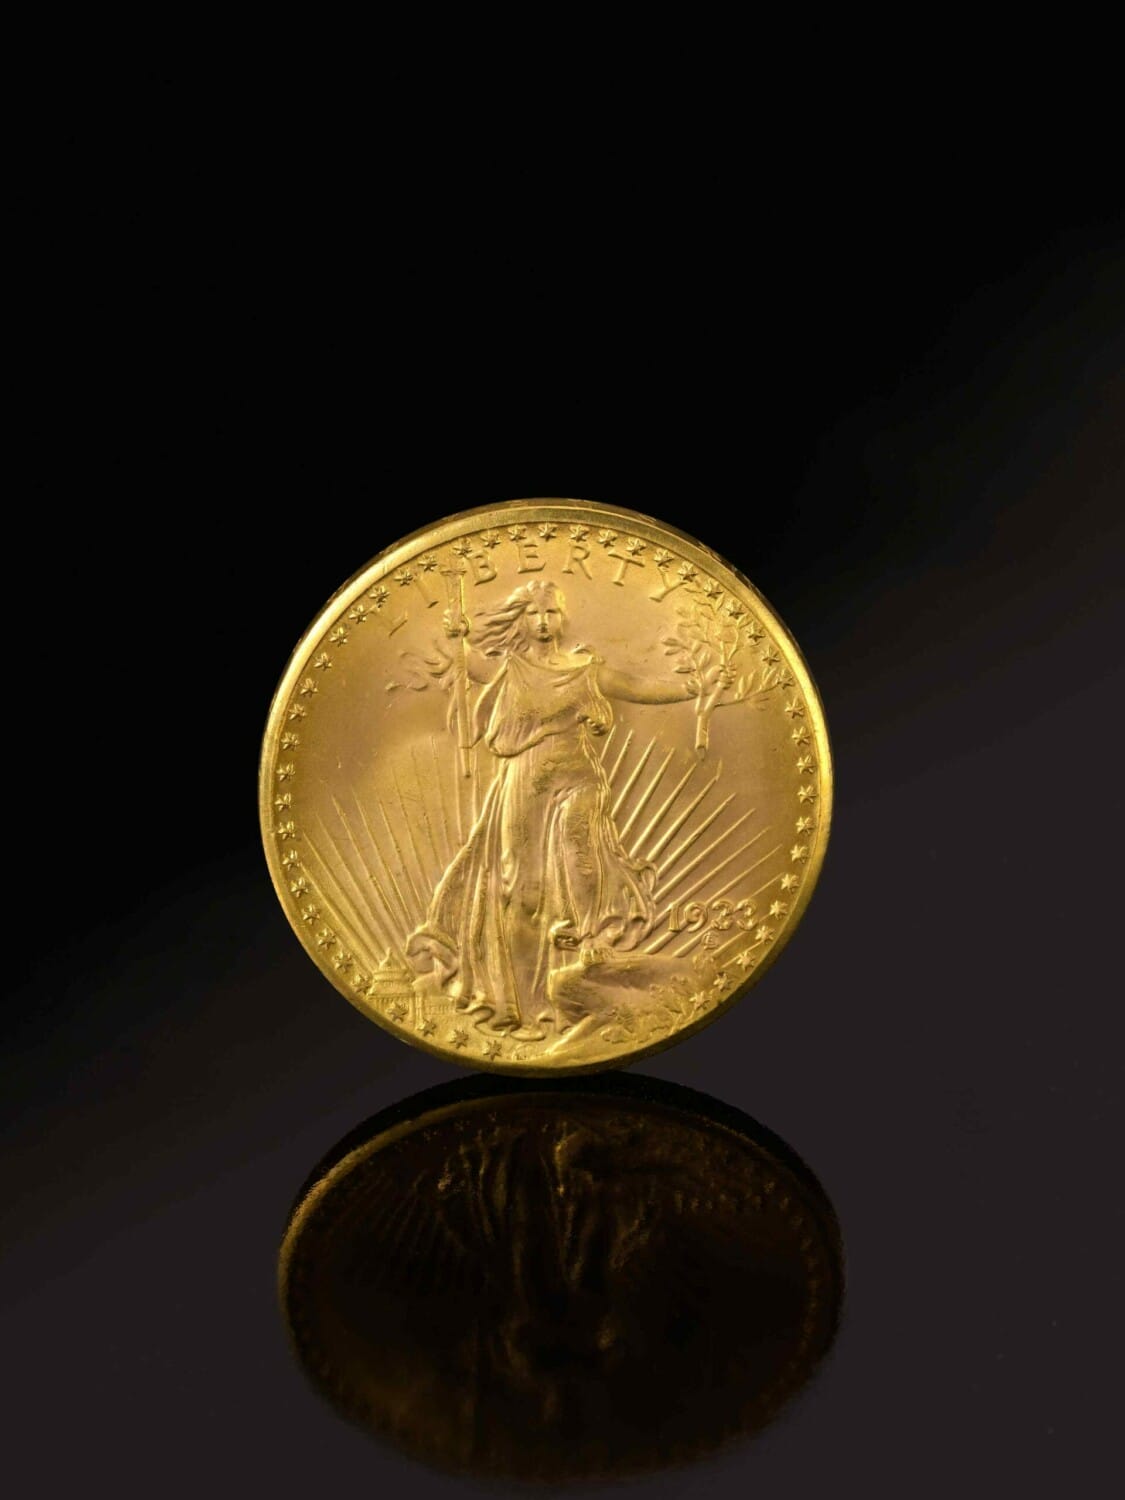 Double Eagle Coin - Photography by SquareMoose